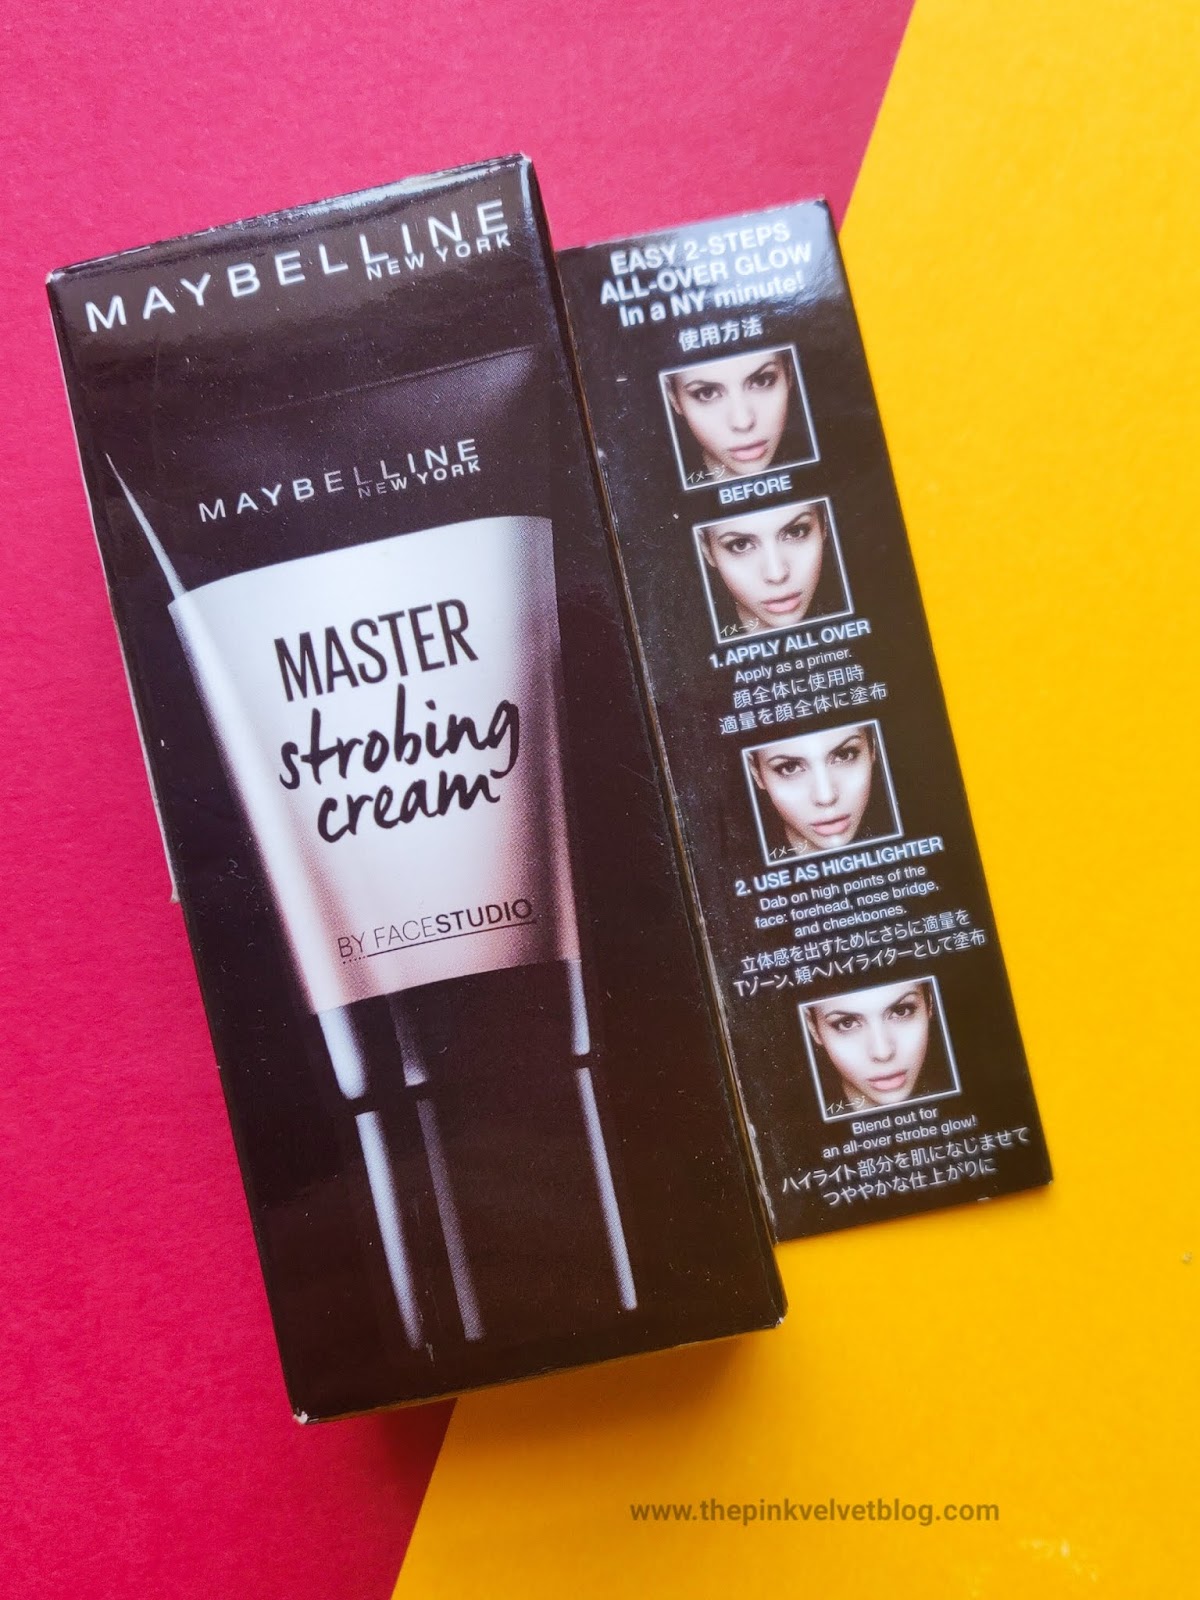 maybelline strobing stick pink review